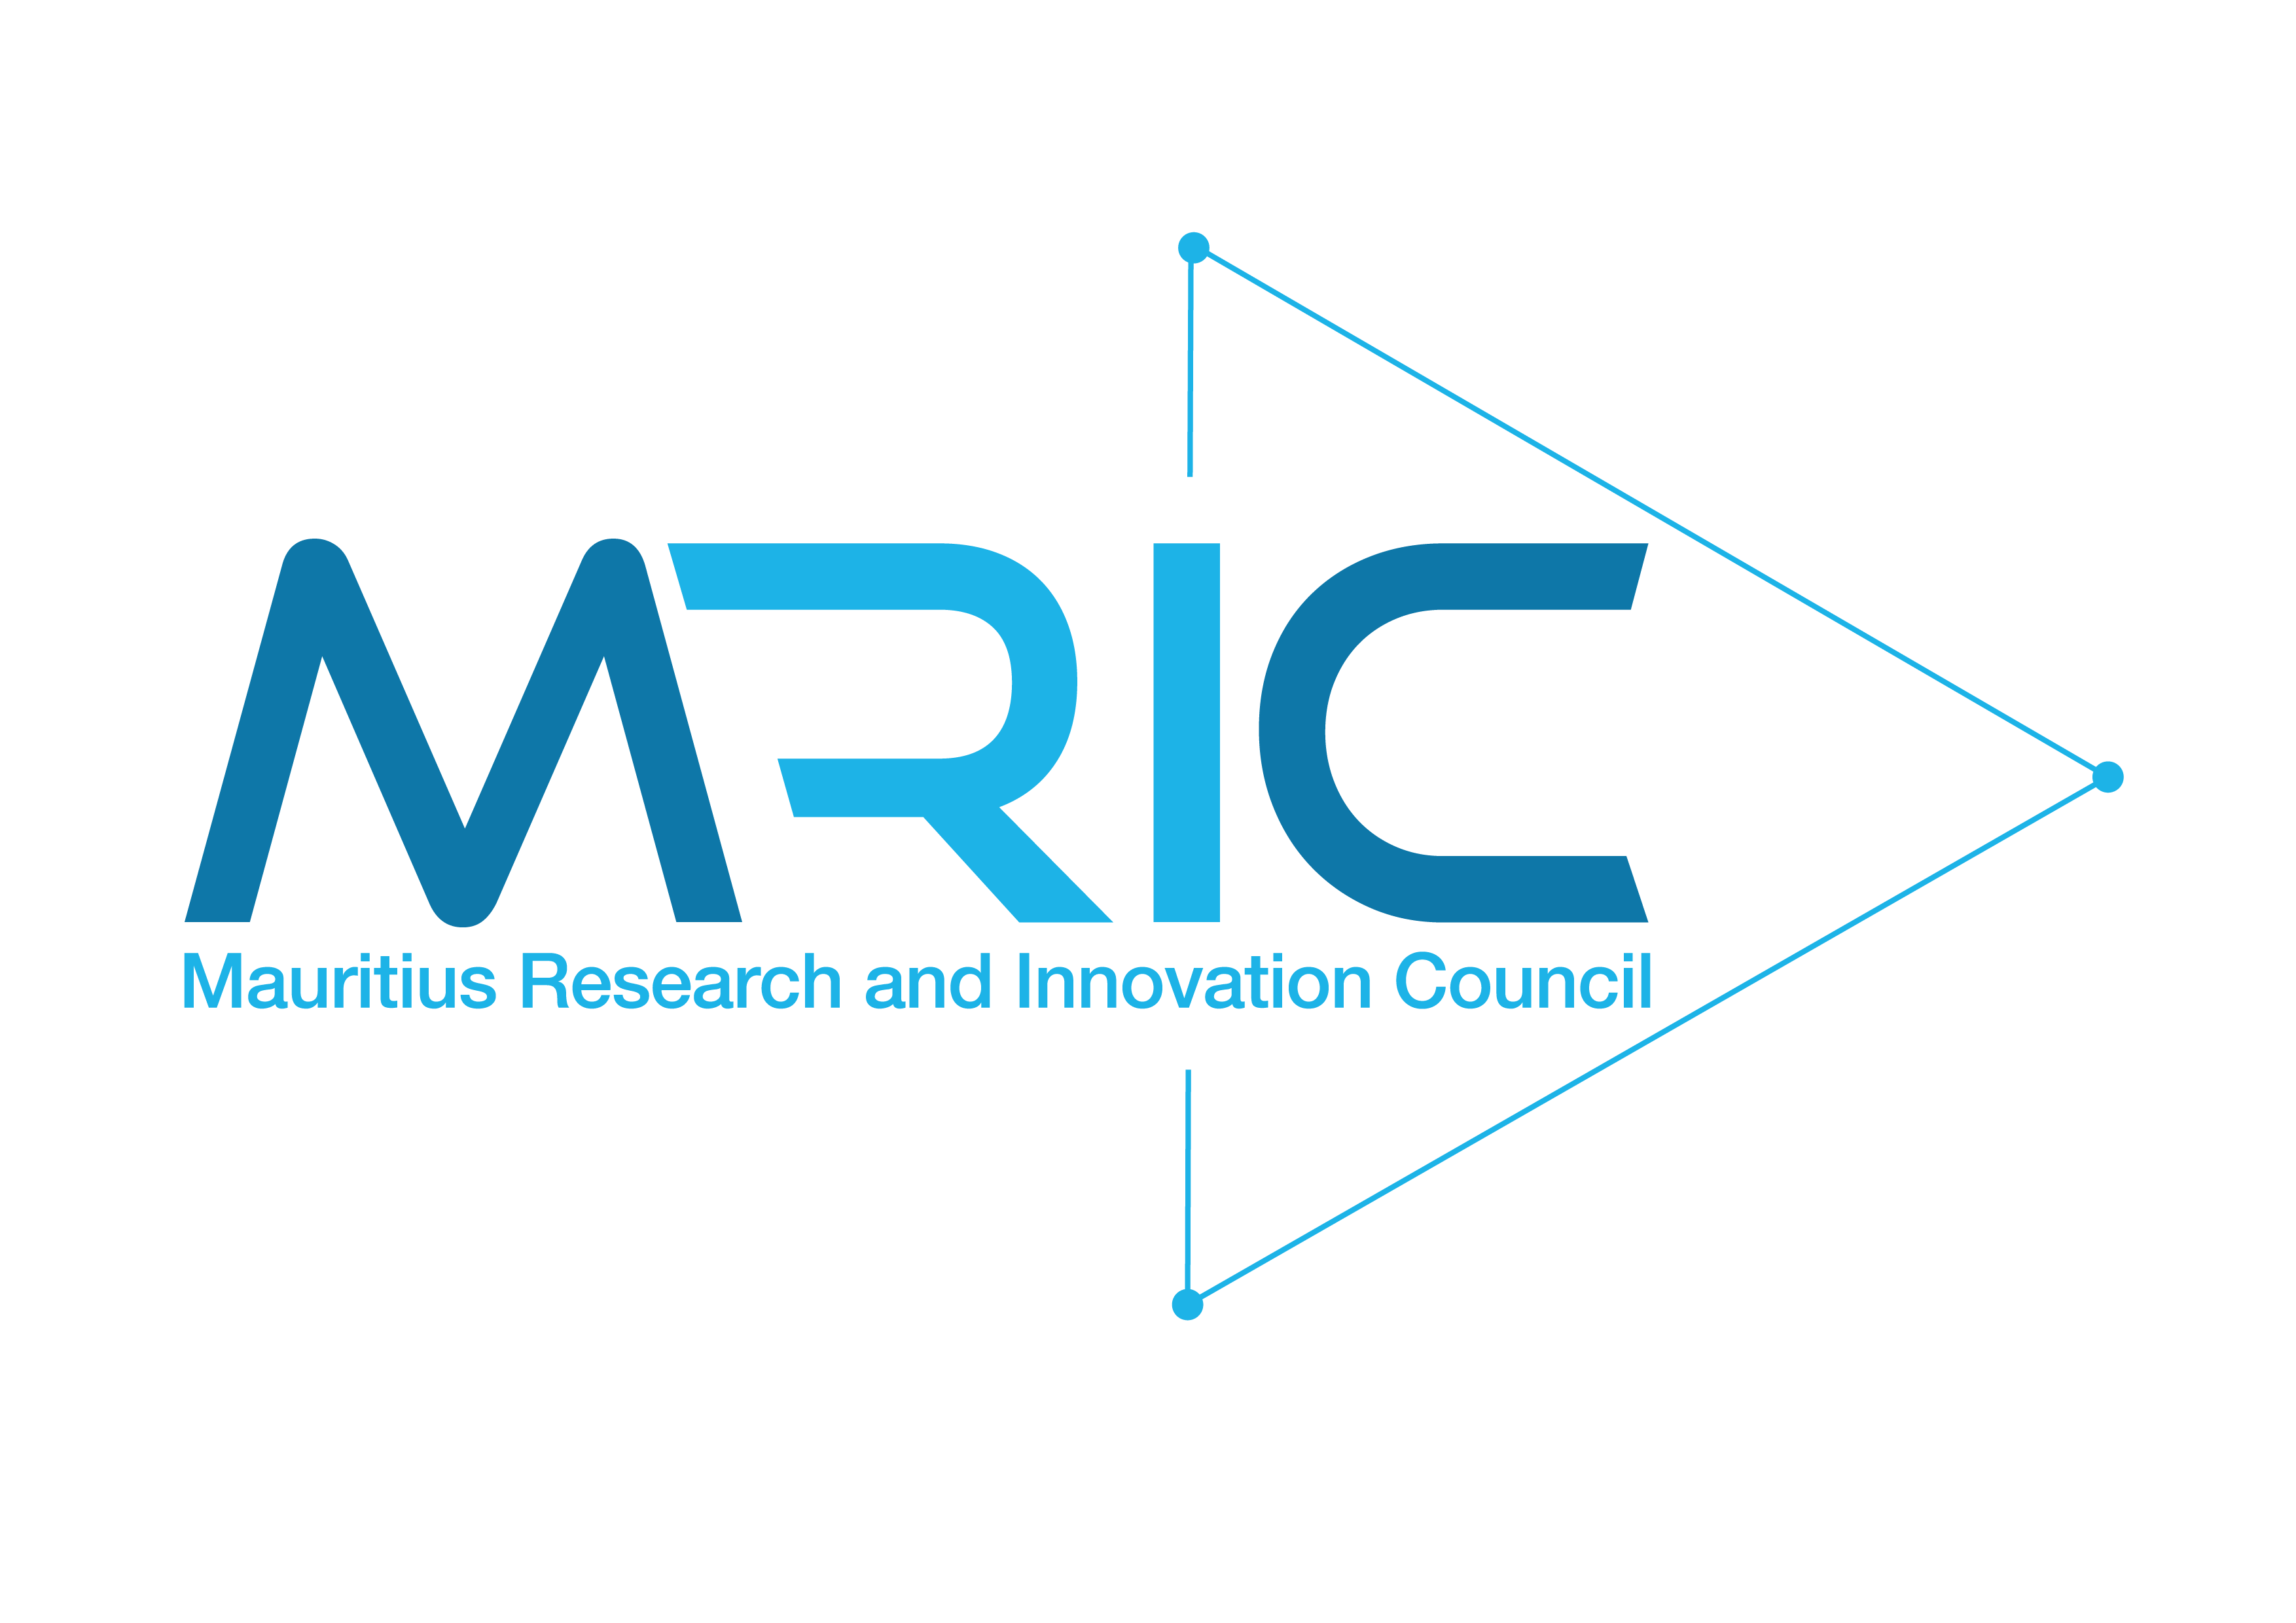 Mauritius Research and Innovation Council